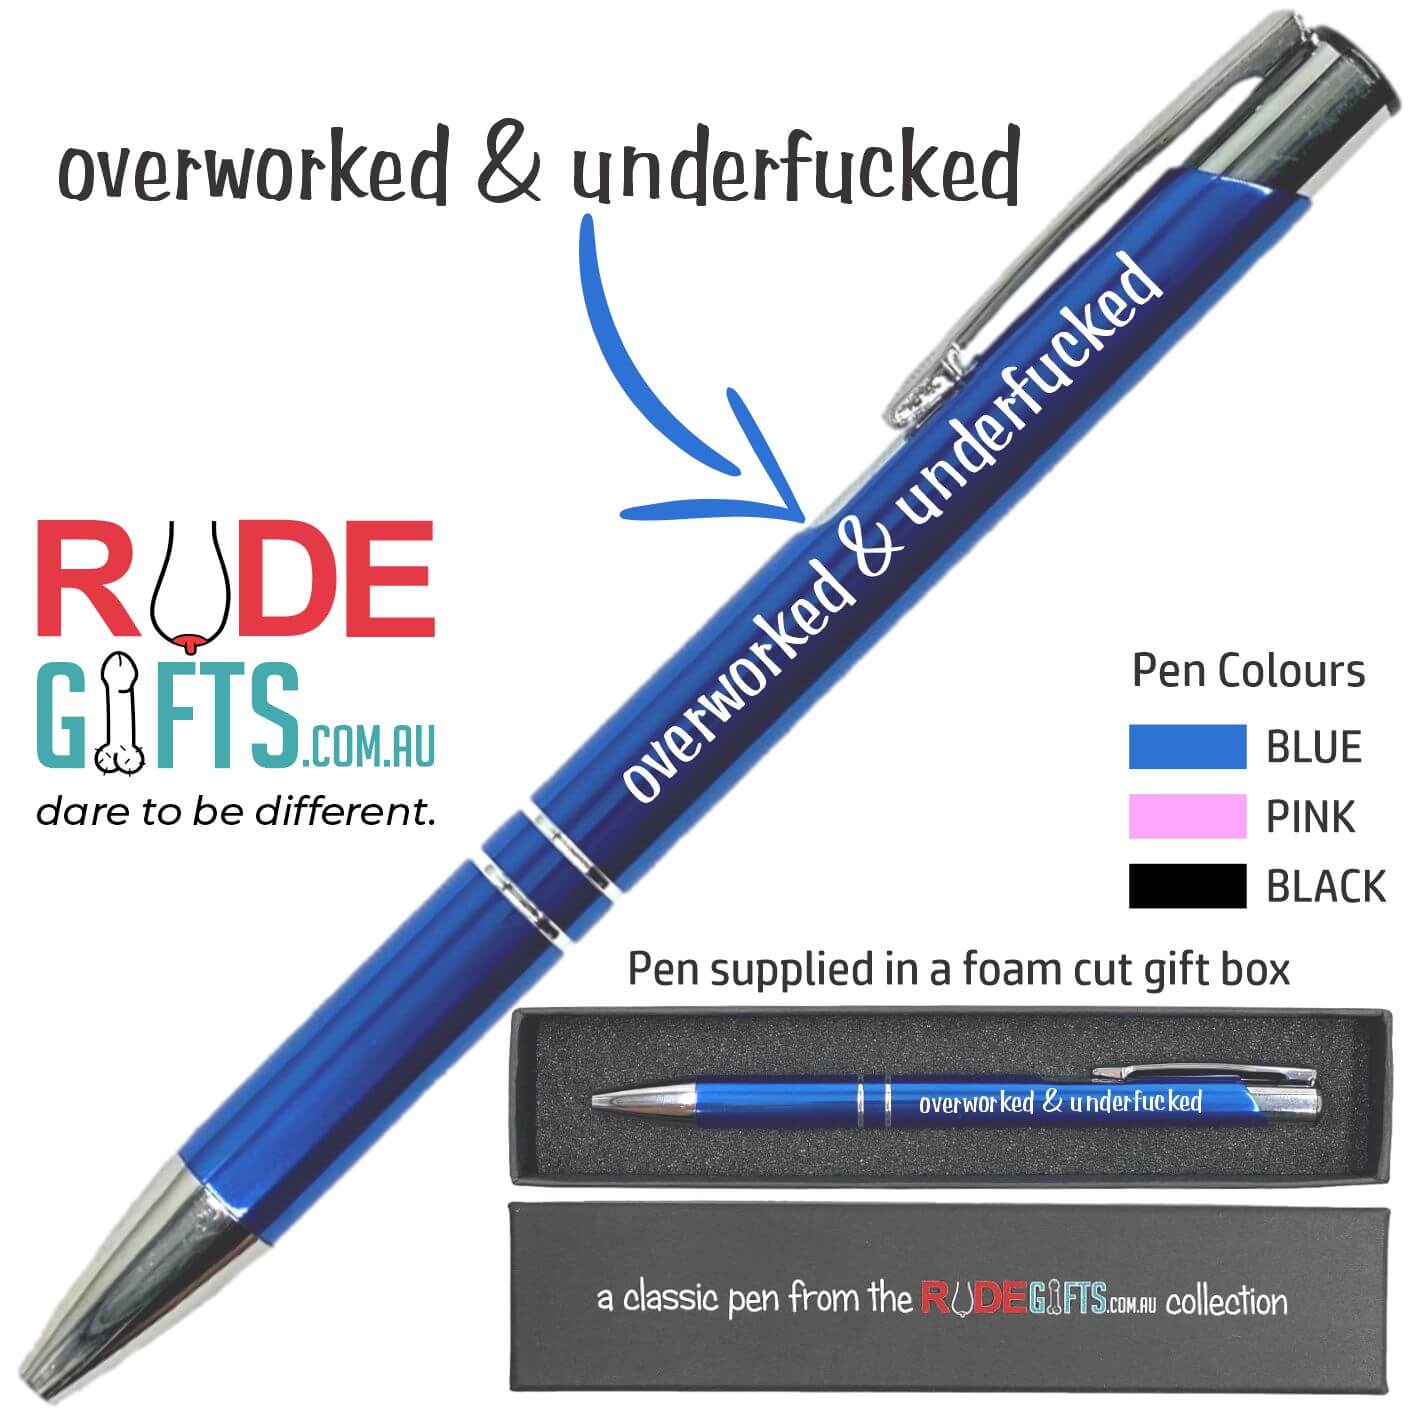 Overworked and underfucked